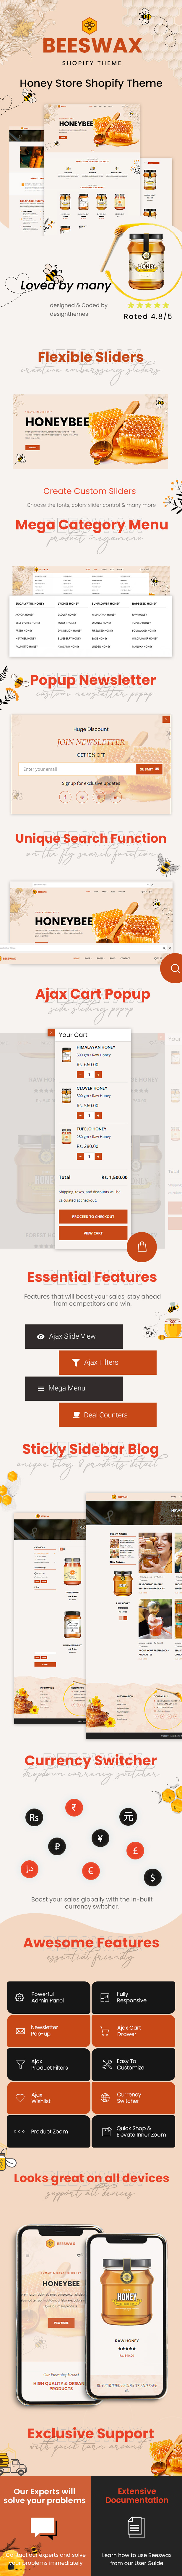 Beeswax - Honey Store Shopify Theme - 1